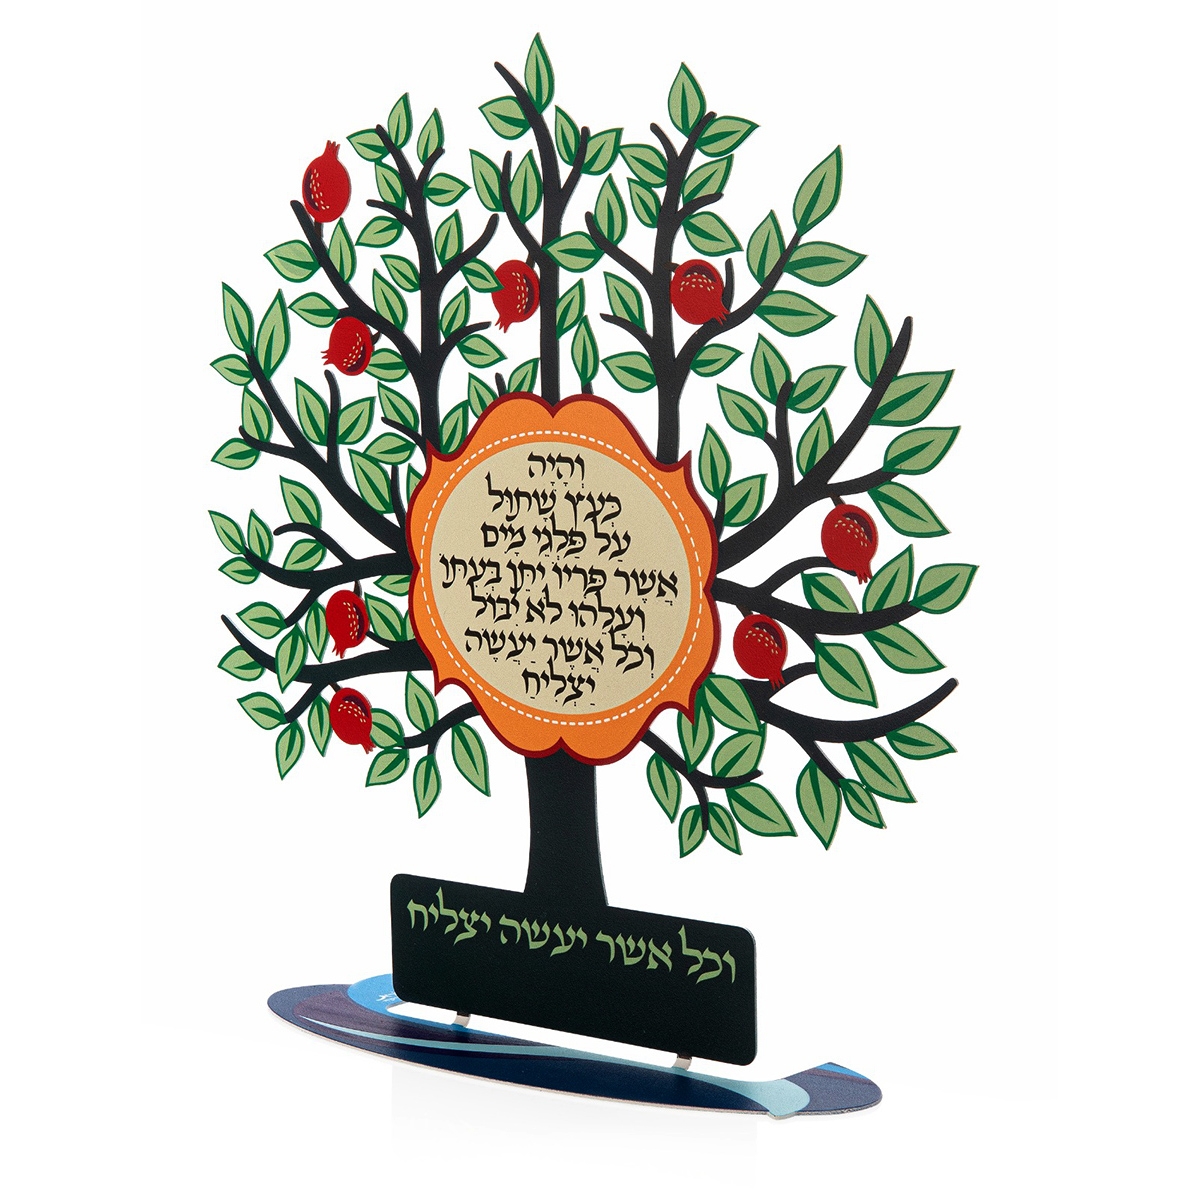 Pomegranate Tree Wall Hanging With "Be Like The Tree" Verse By Dorit Judaica (Hebrew) - 1